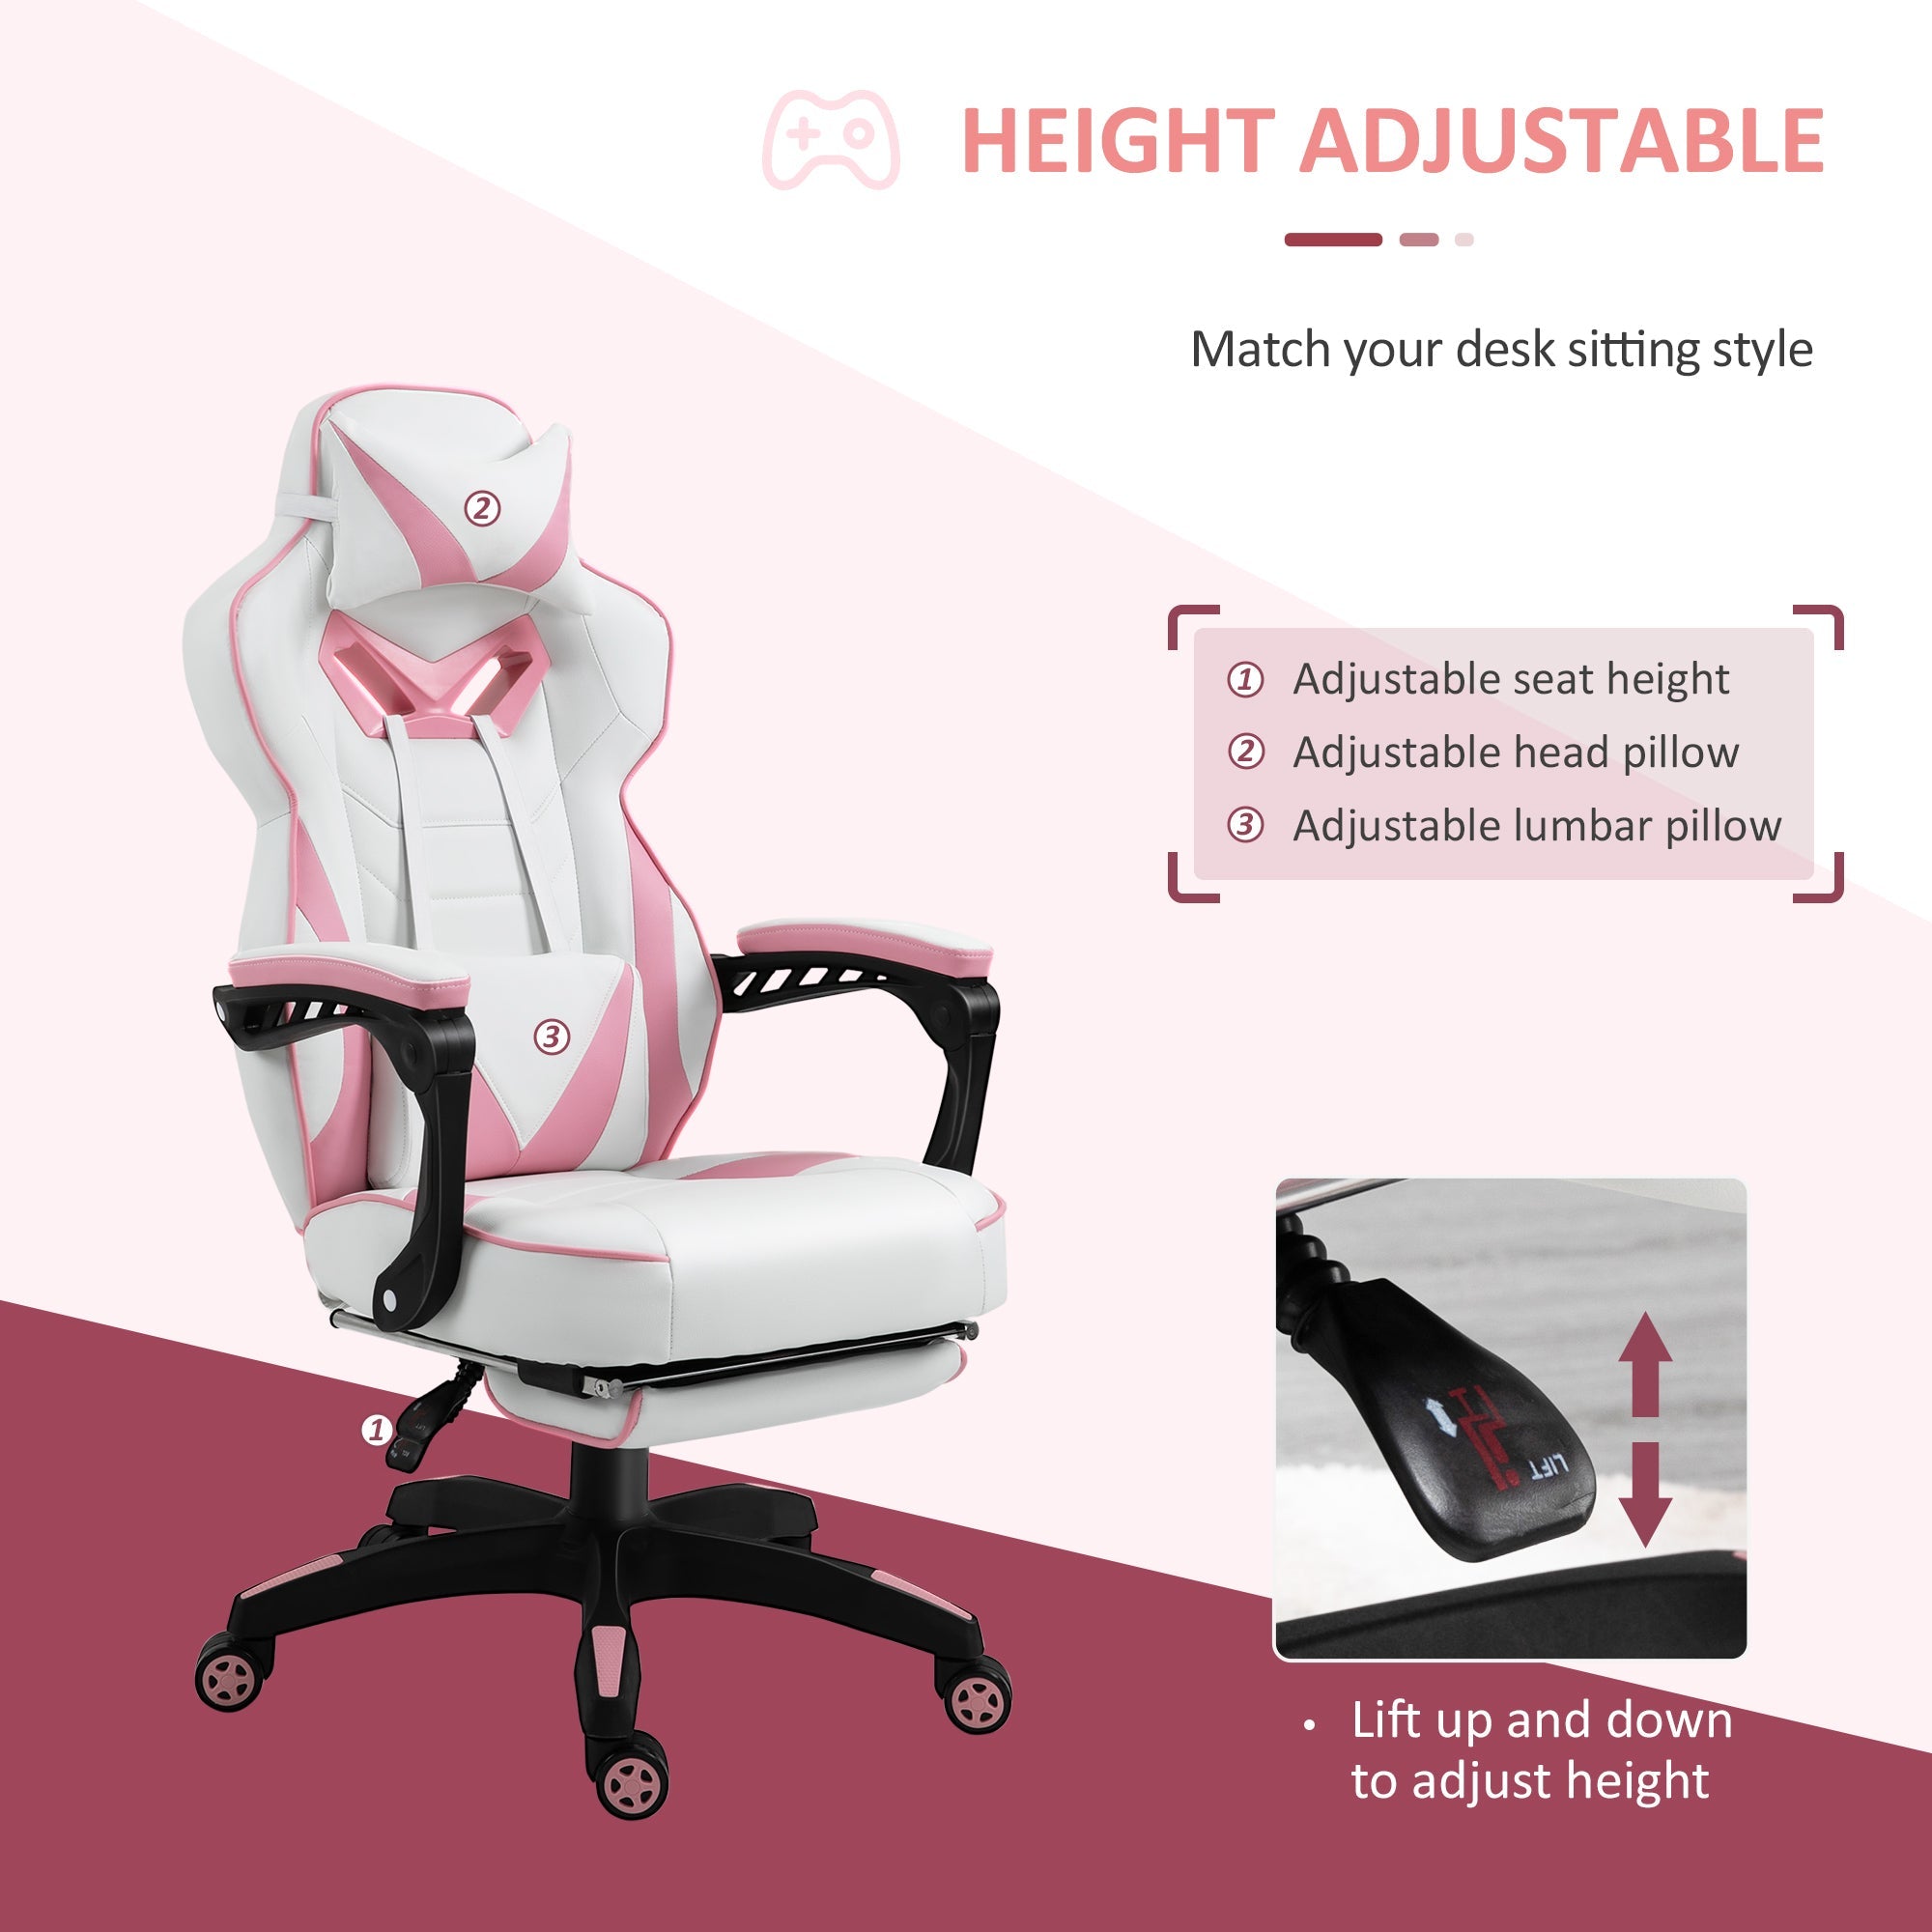 Ergonomic Racing Gaming Chair Office Desk Chair Adjustable Height Recliner with Wheels, Headrest, Lumbar Support, Retractable Footrest, Pink-3